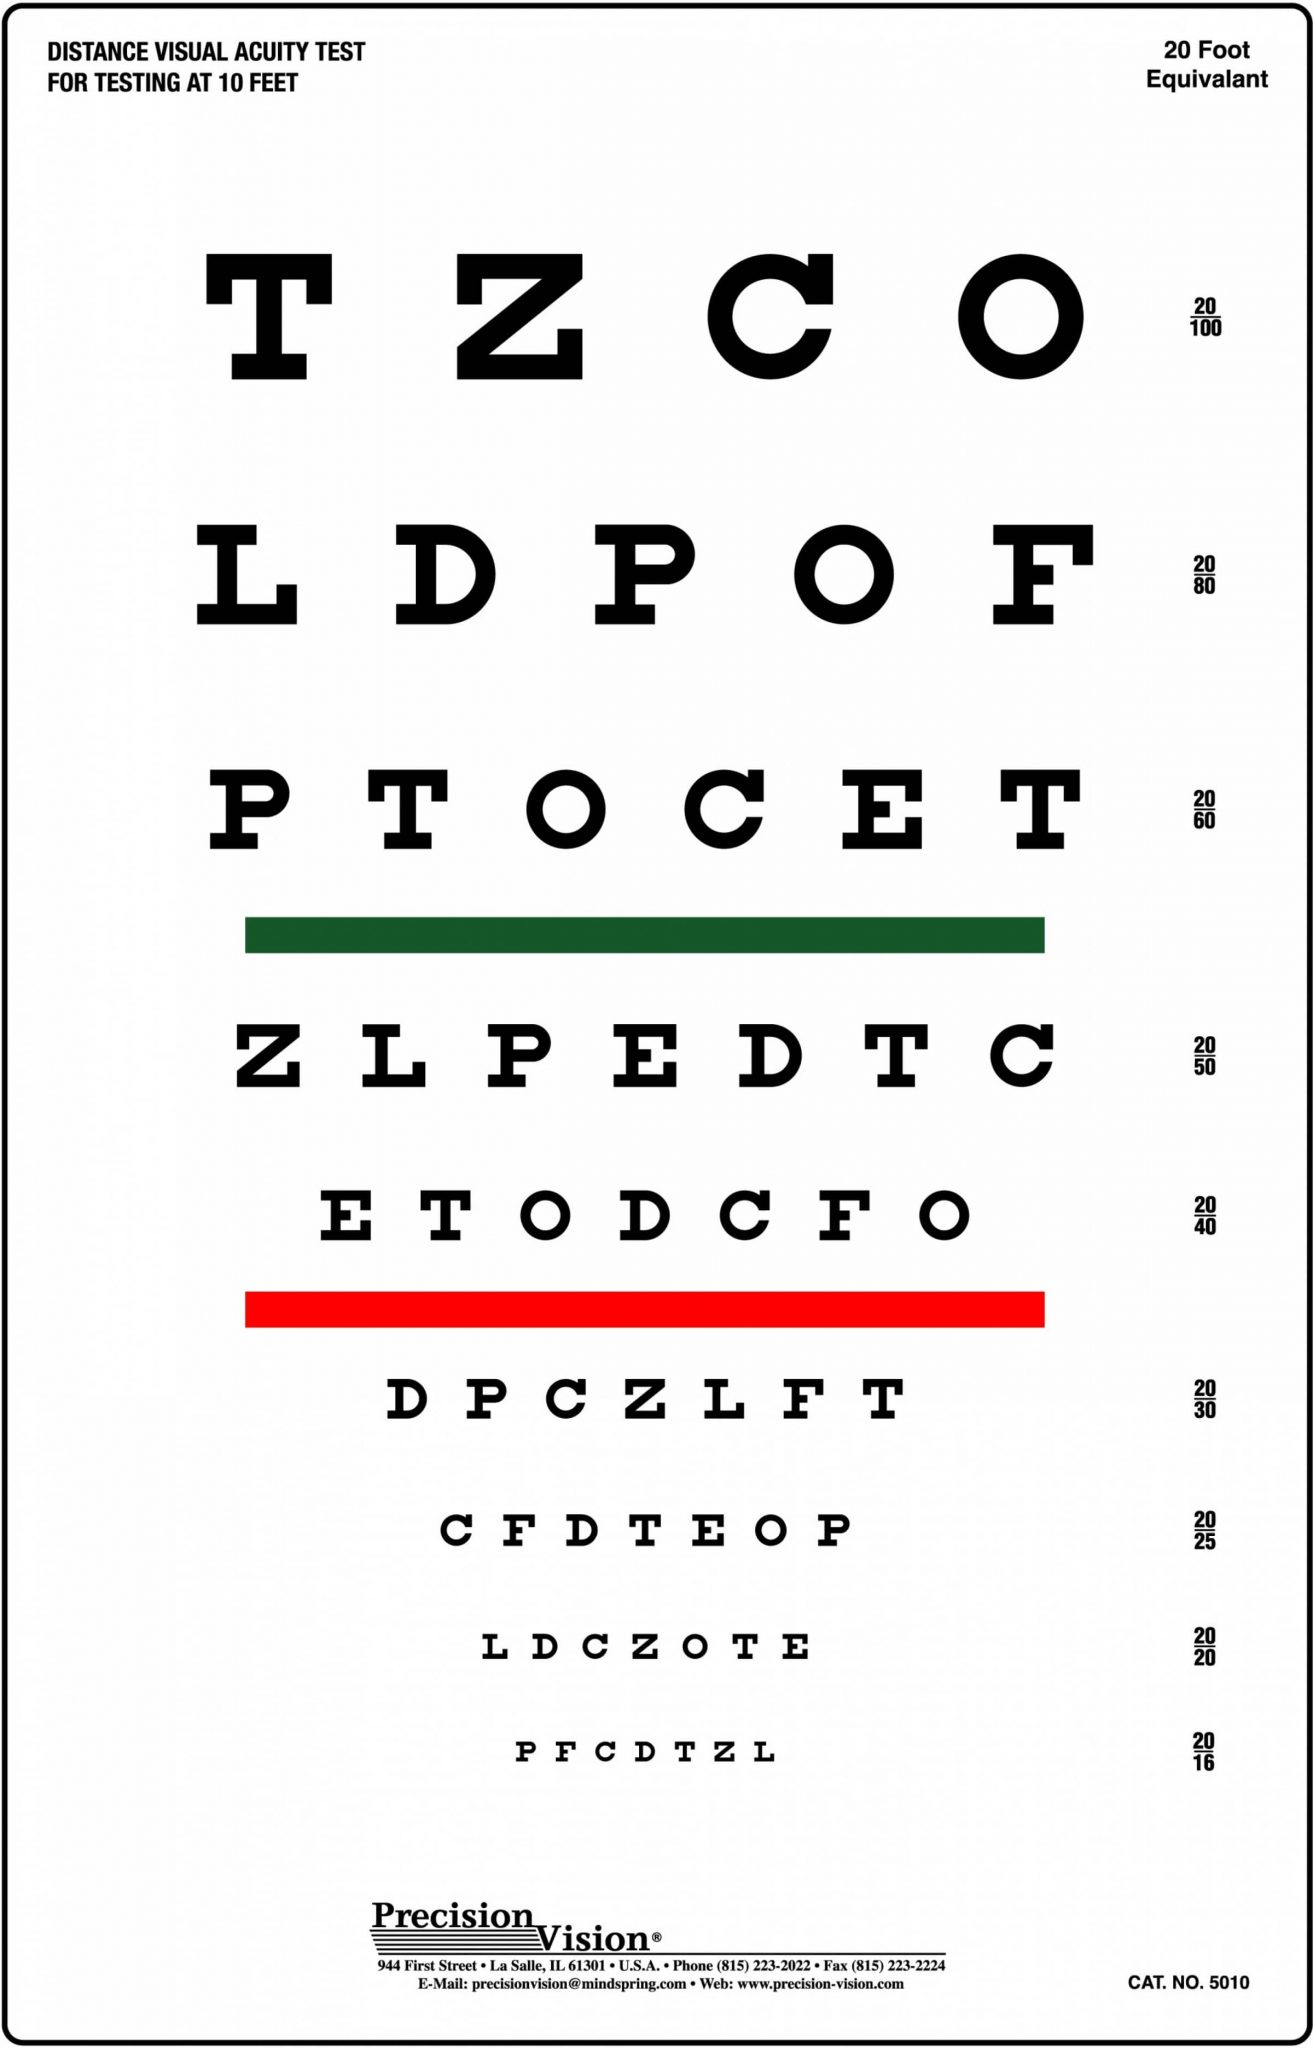 Snellen Chart Red And Green Bar Visual Acuity Test Precision Vision ...